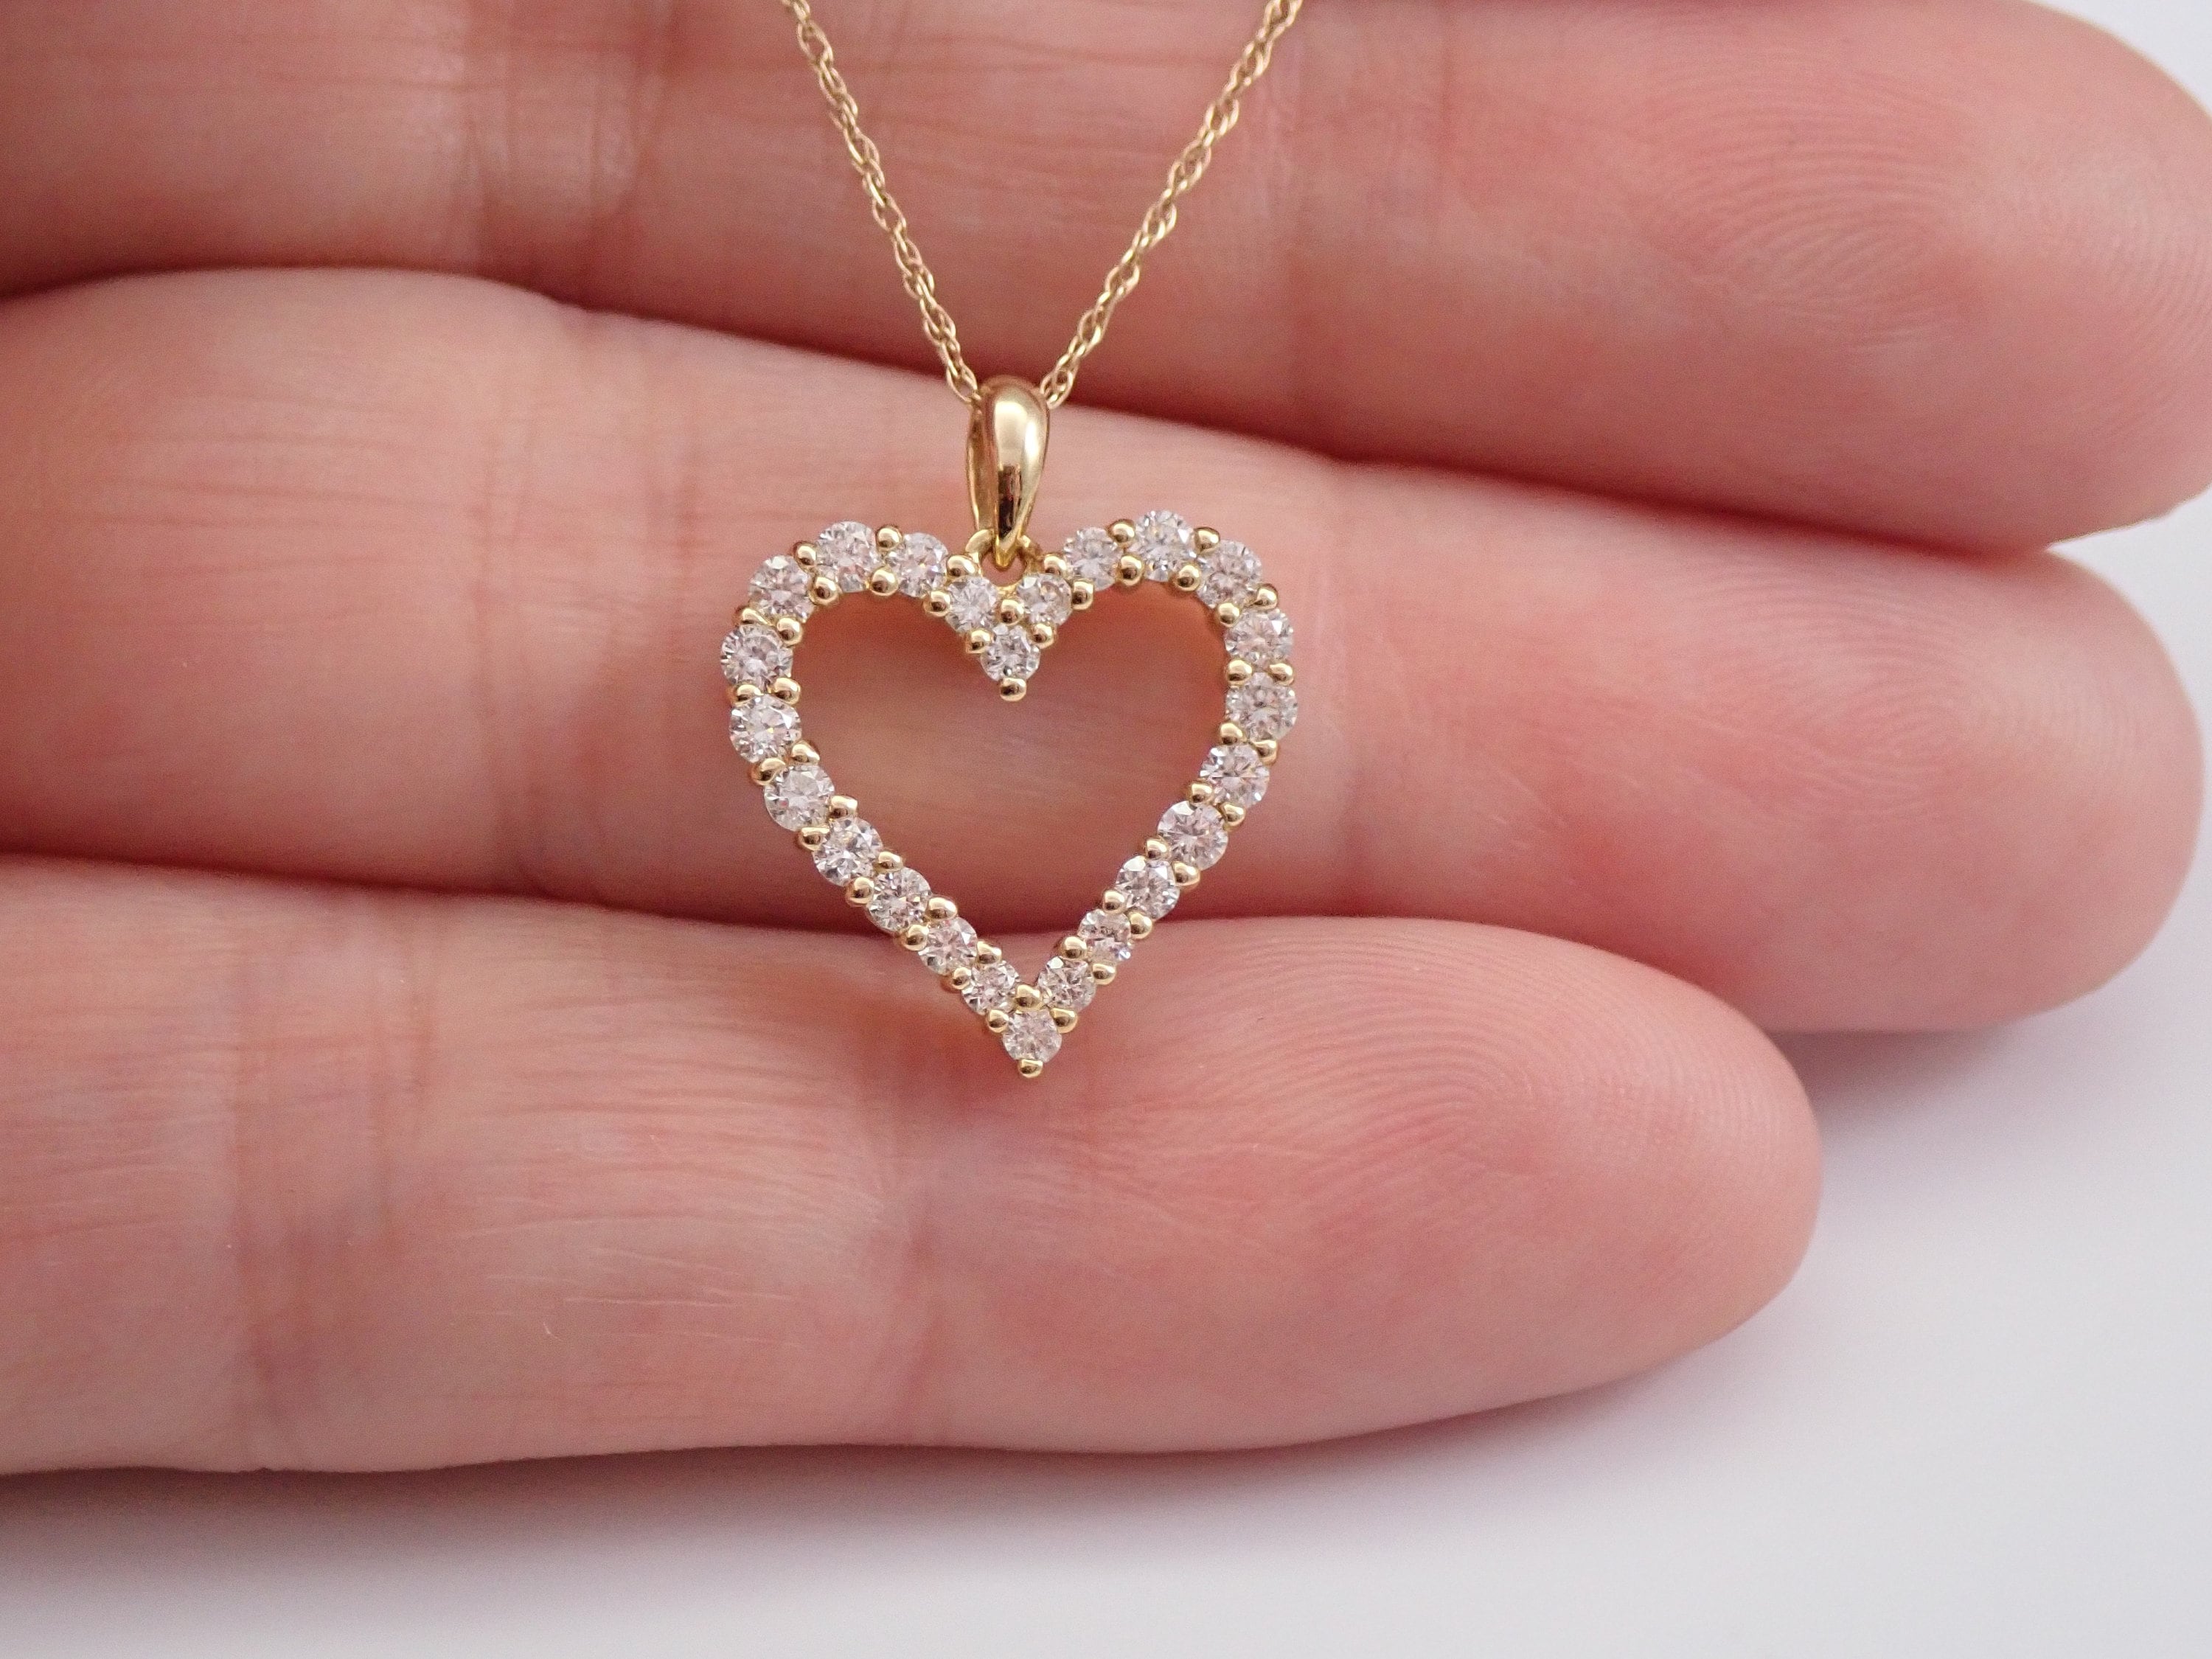 Gold heart chain necklace